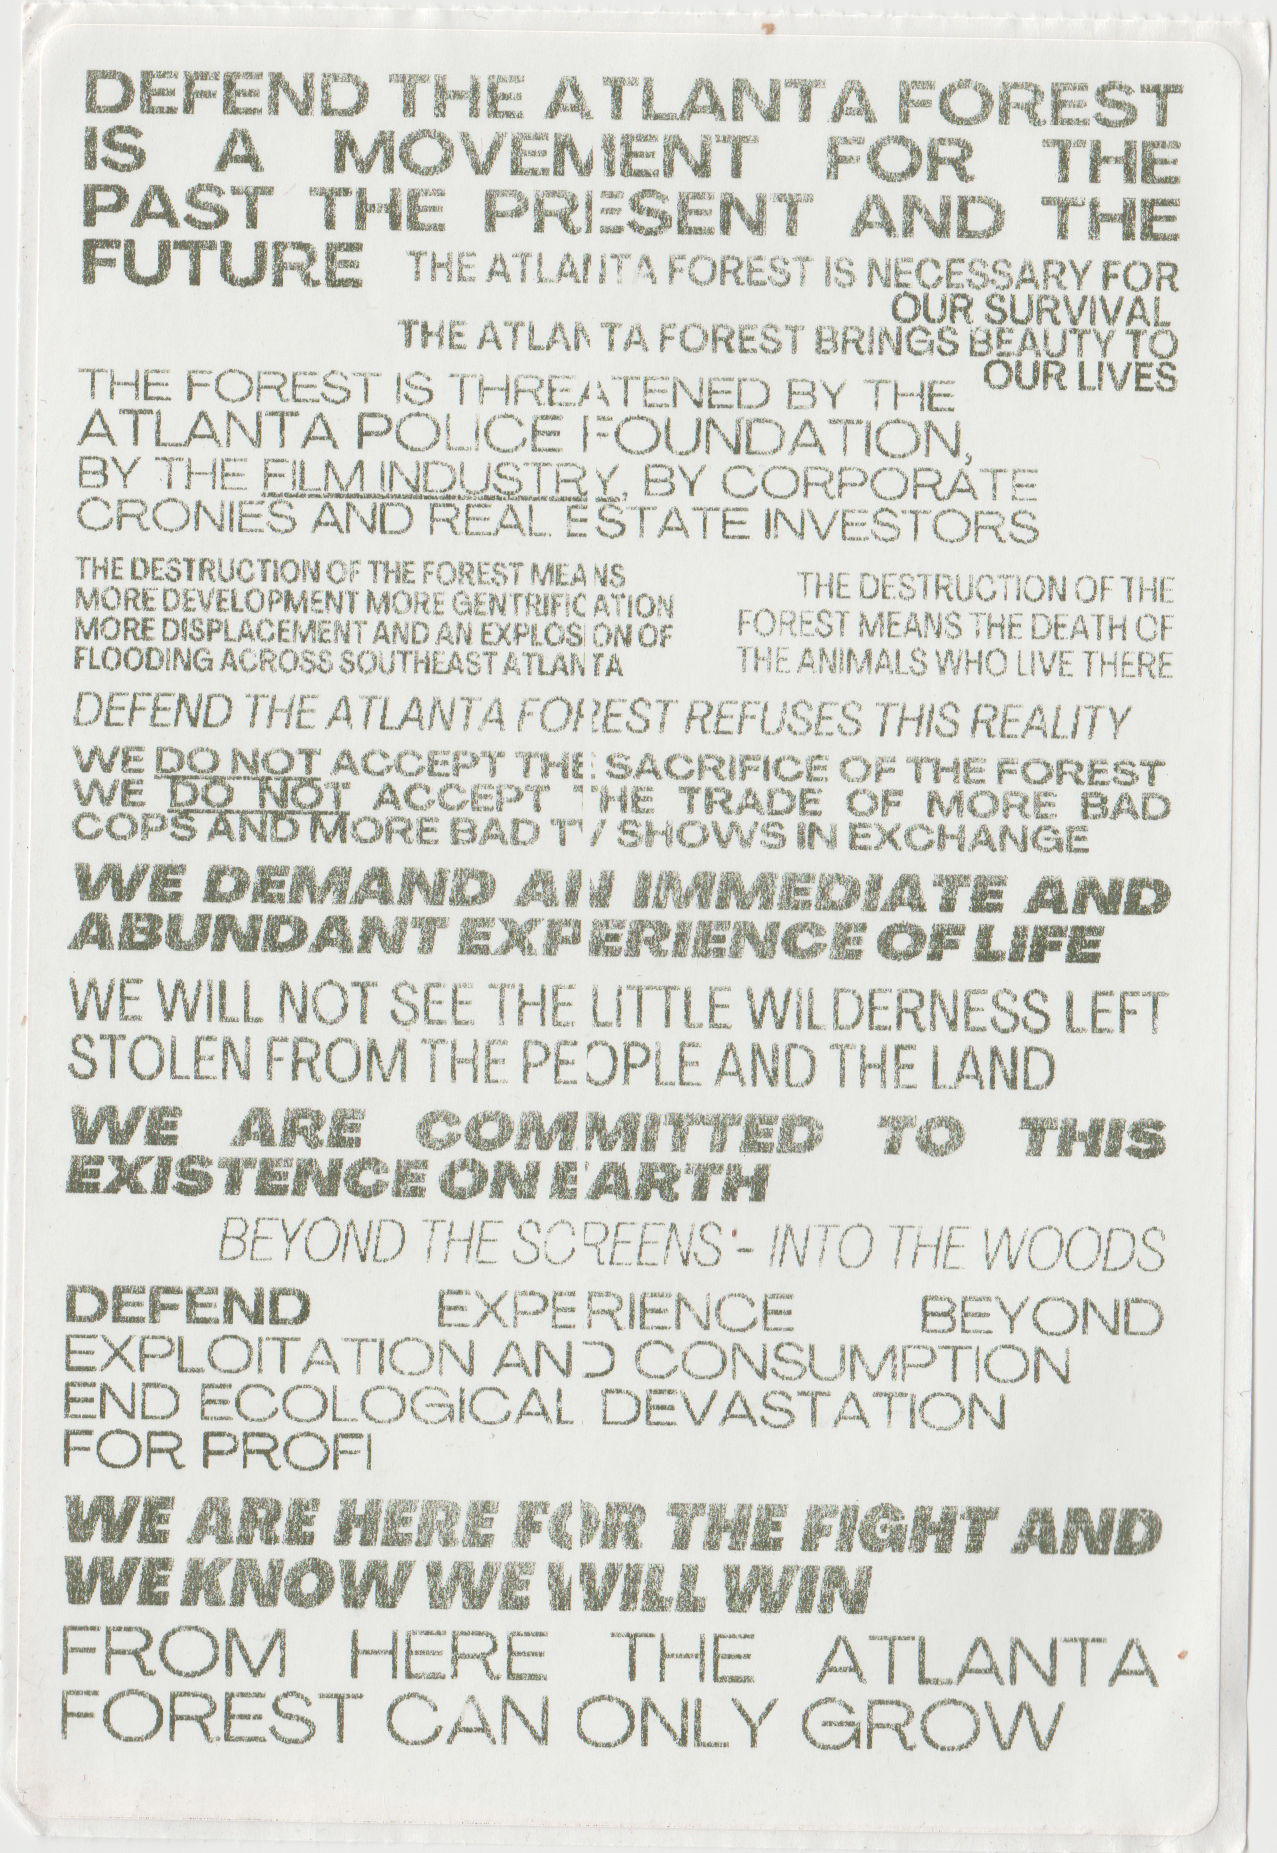 Typographic flyer from the DTF movement; faded black text on gray paper.